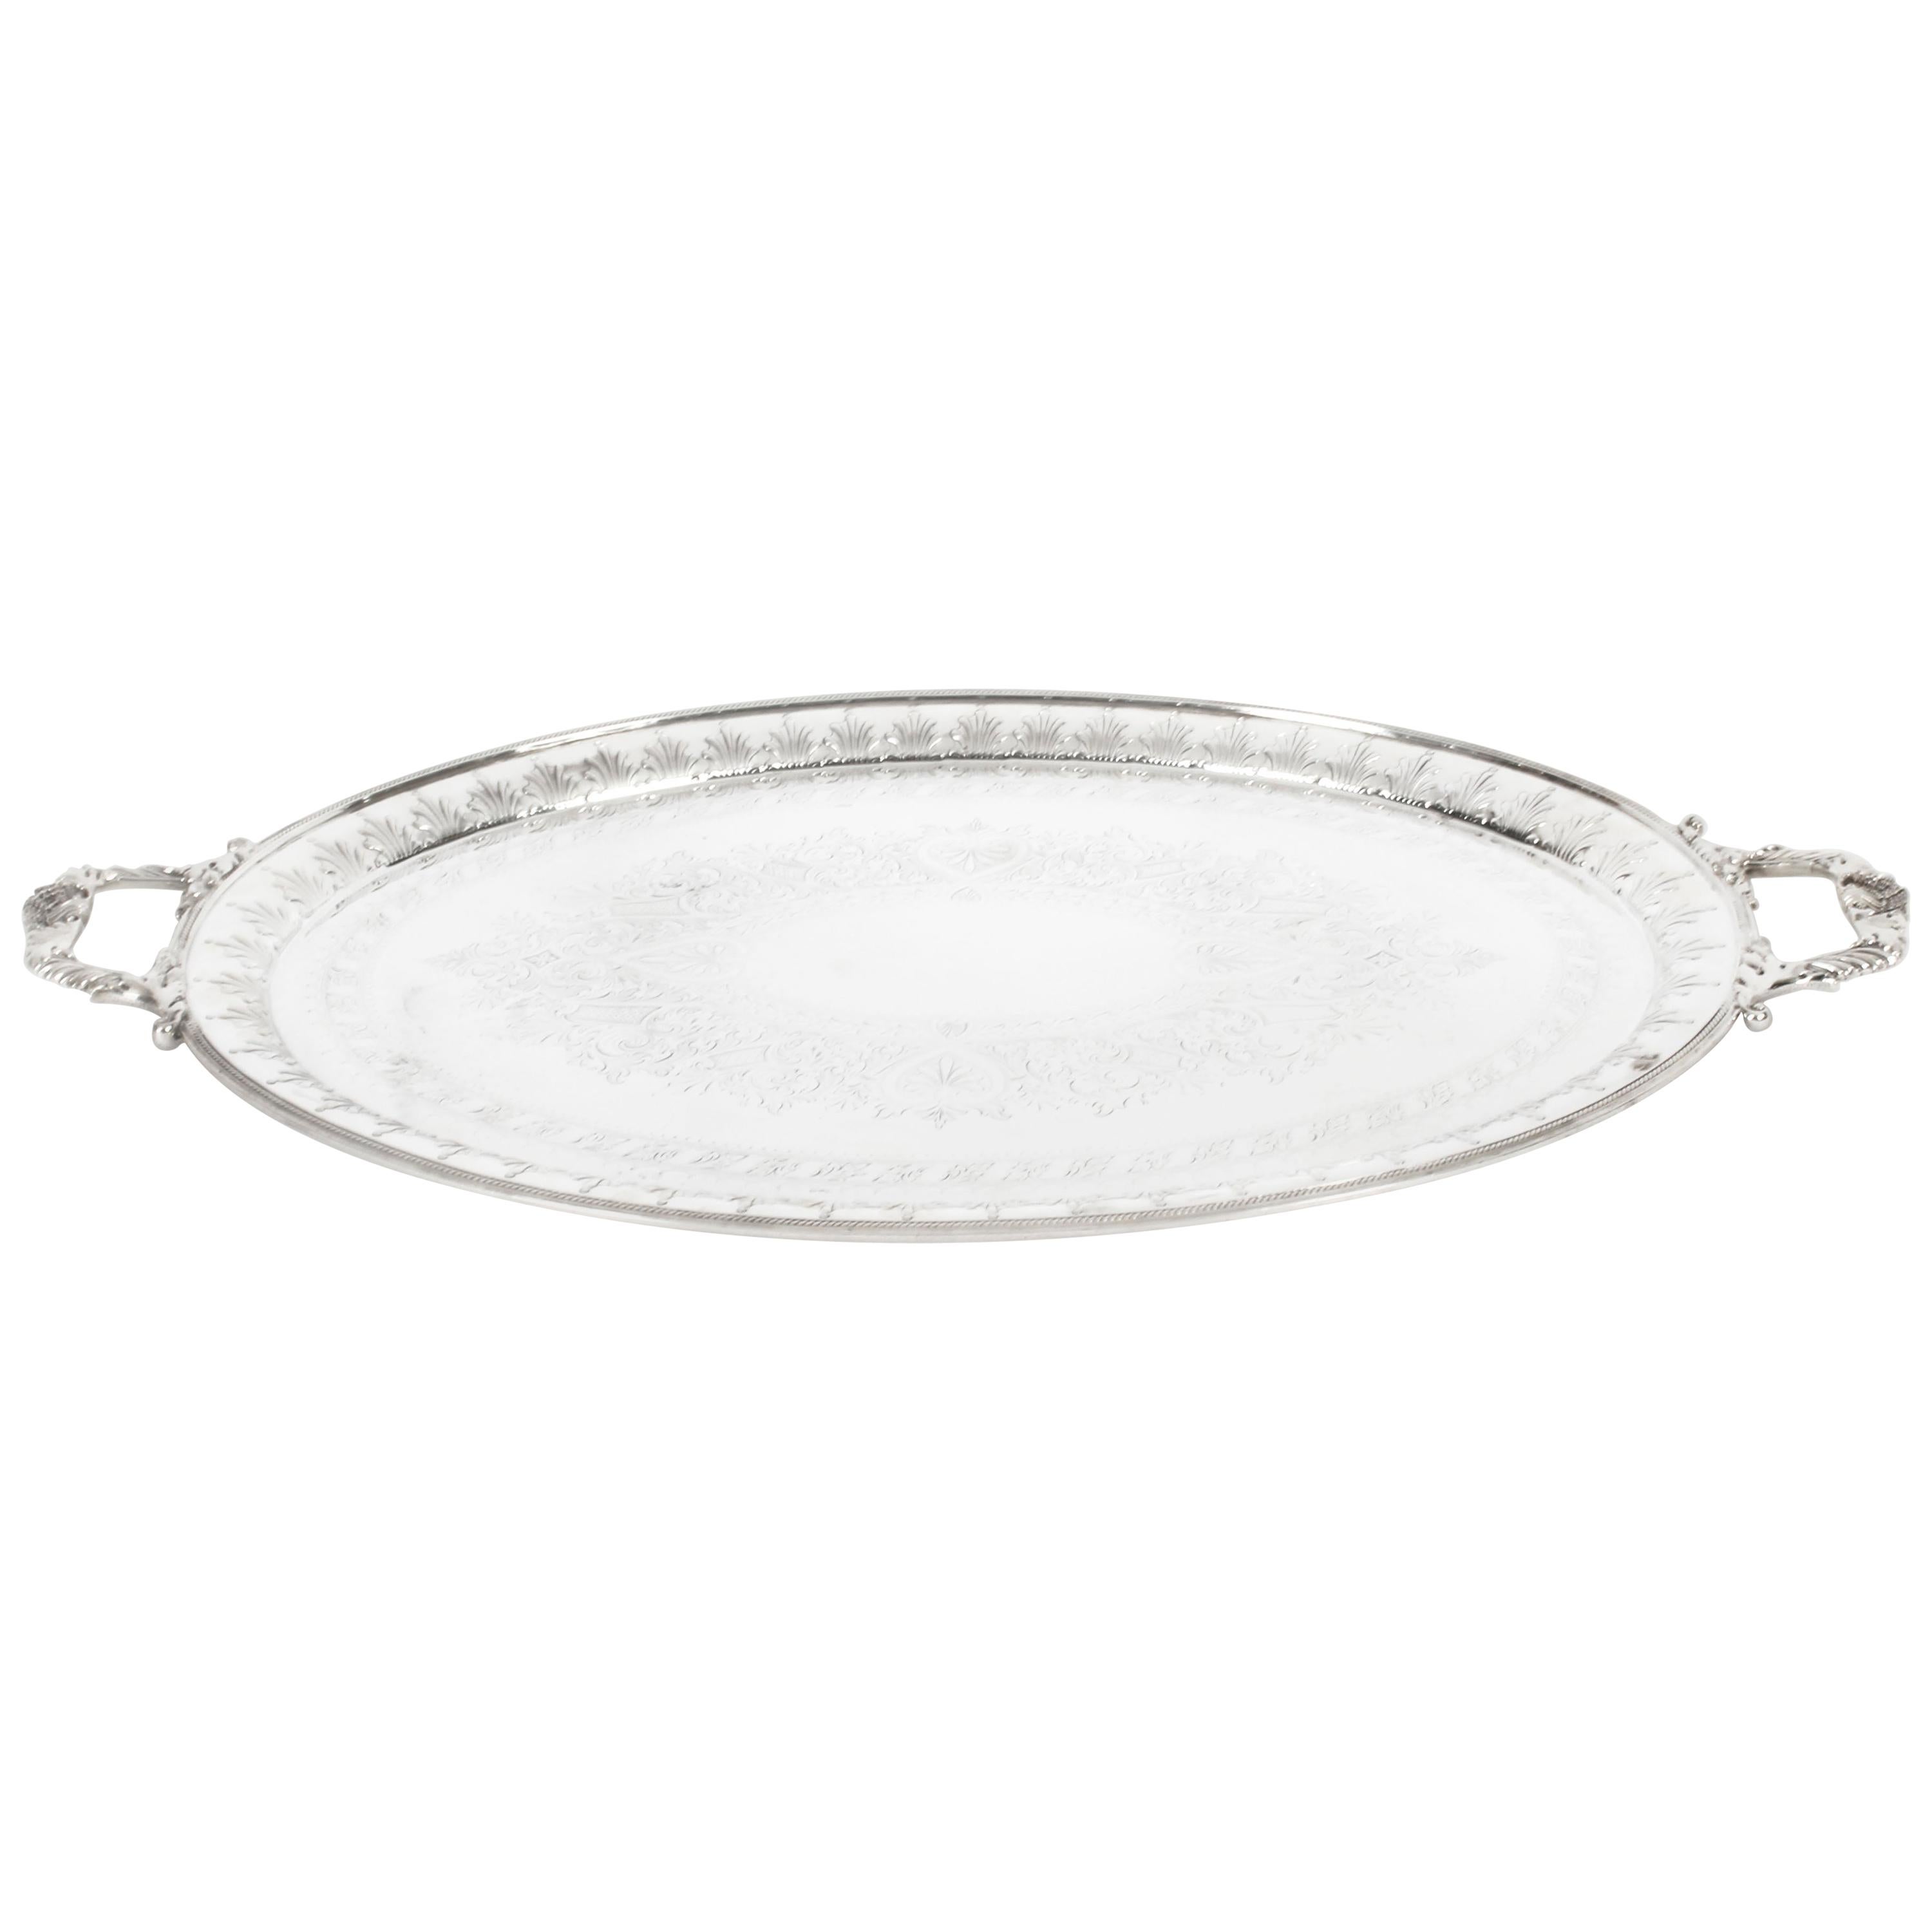 Victorian Neoclassical Oval Silver Plated Tray William Hutton, 19th Century